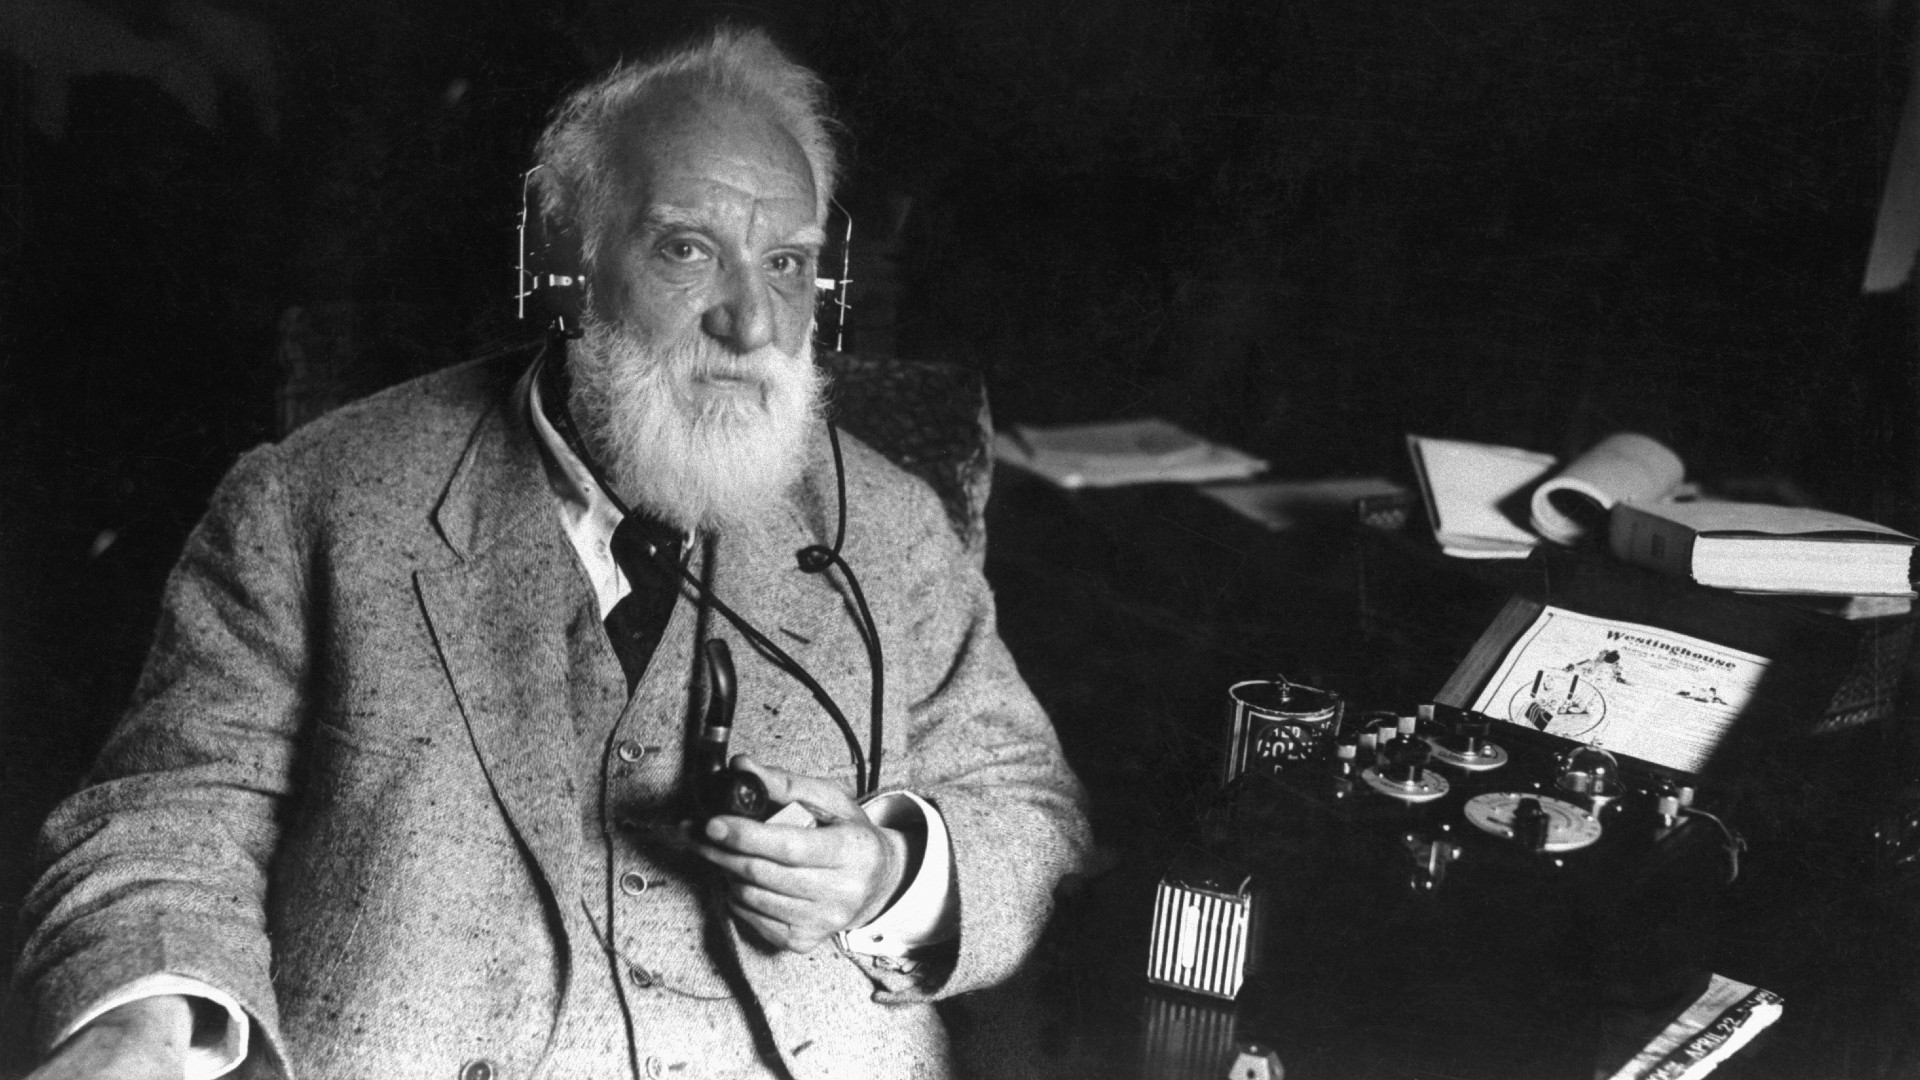 American inventor Alexander Graham Bell (1847-1922) with one of his inventions, ca. 1910. Bell engineered the first intelligible electronic transmission of voice and patented the telephone, and was a founding member and president of the National Geographic Society.